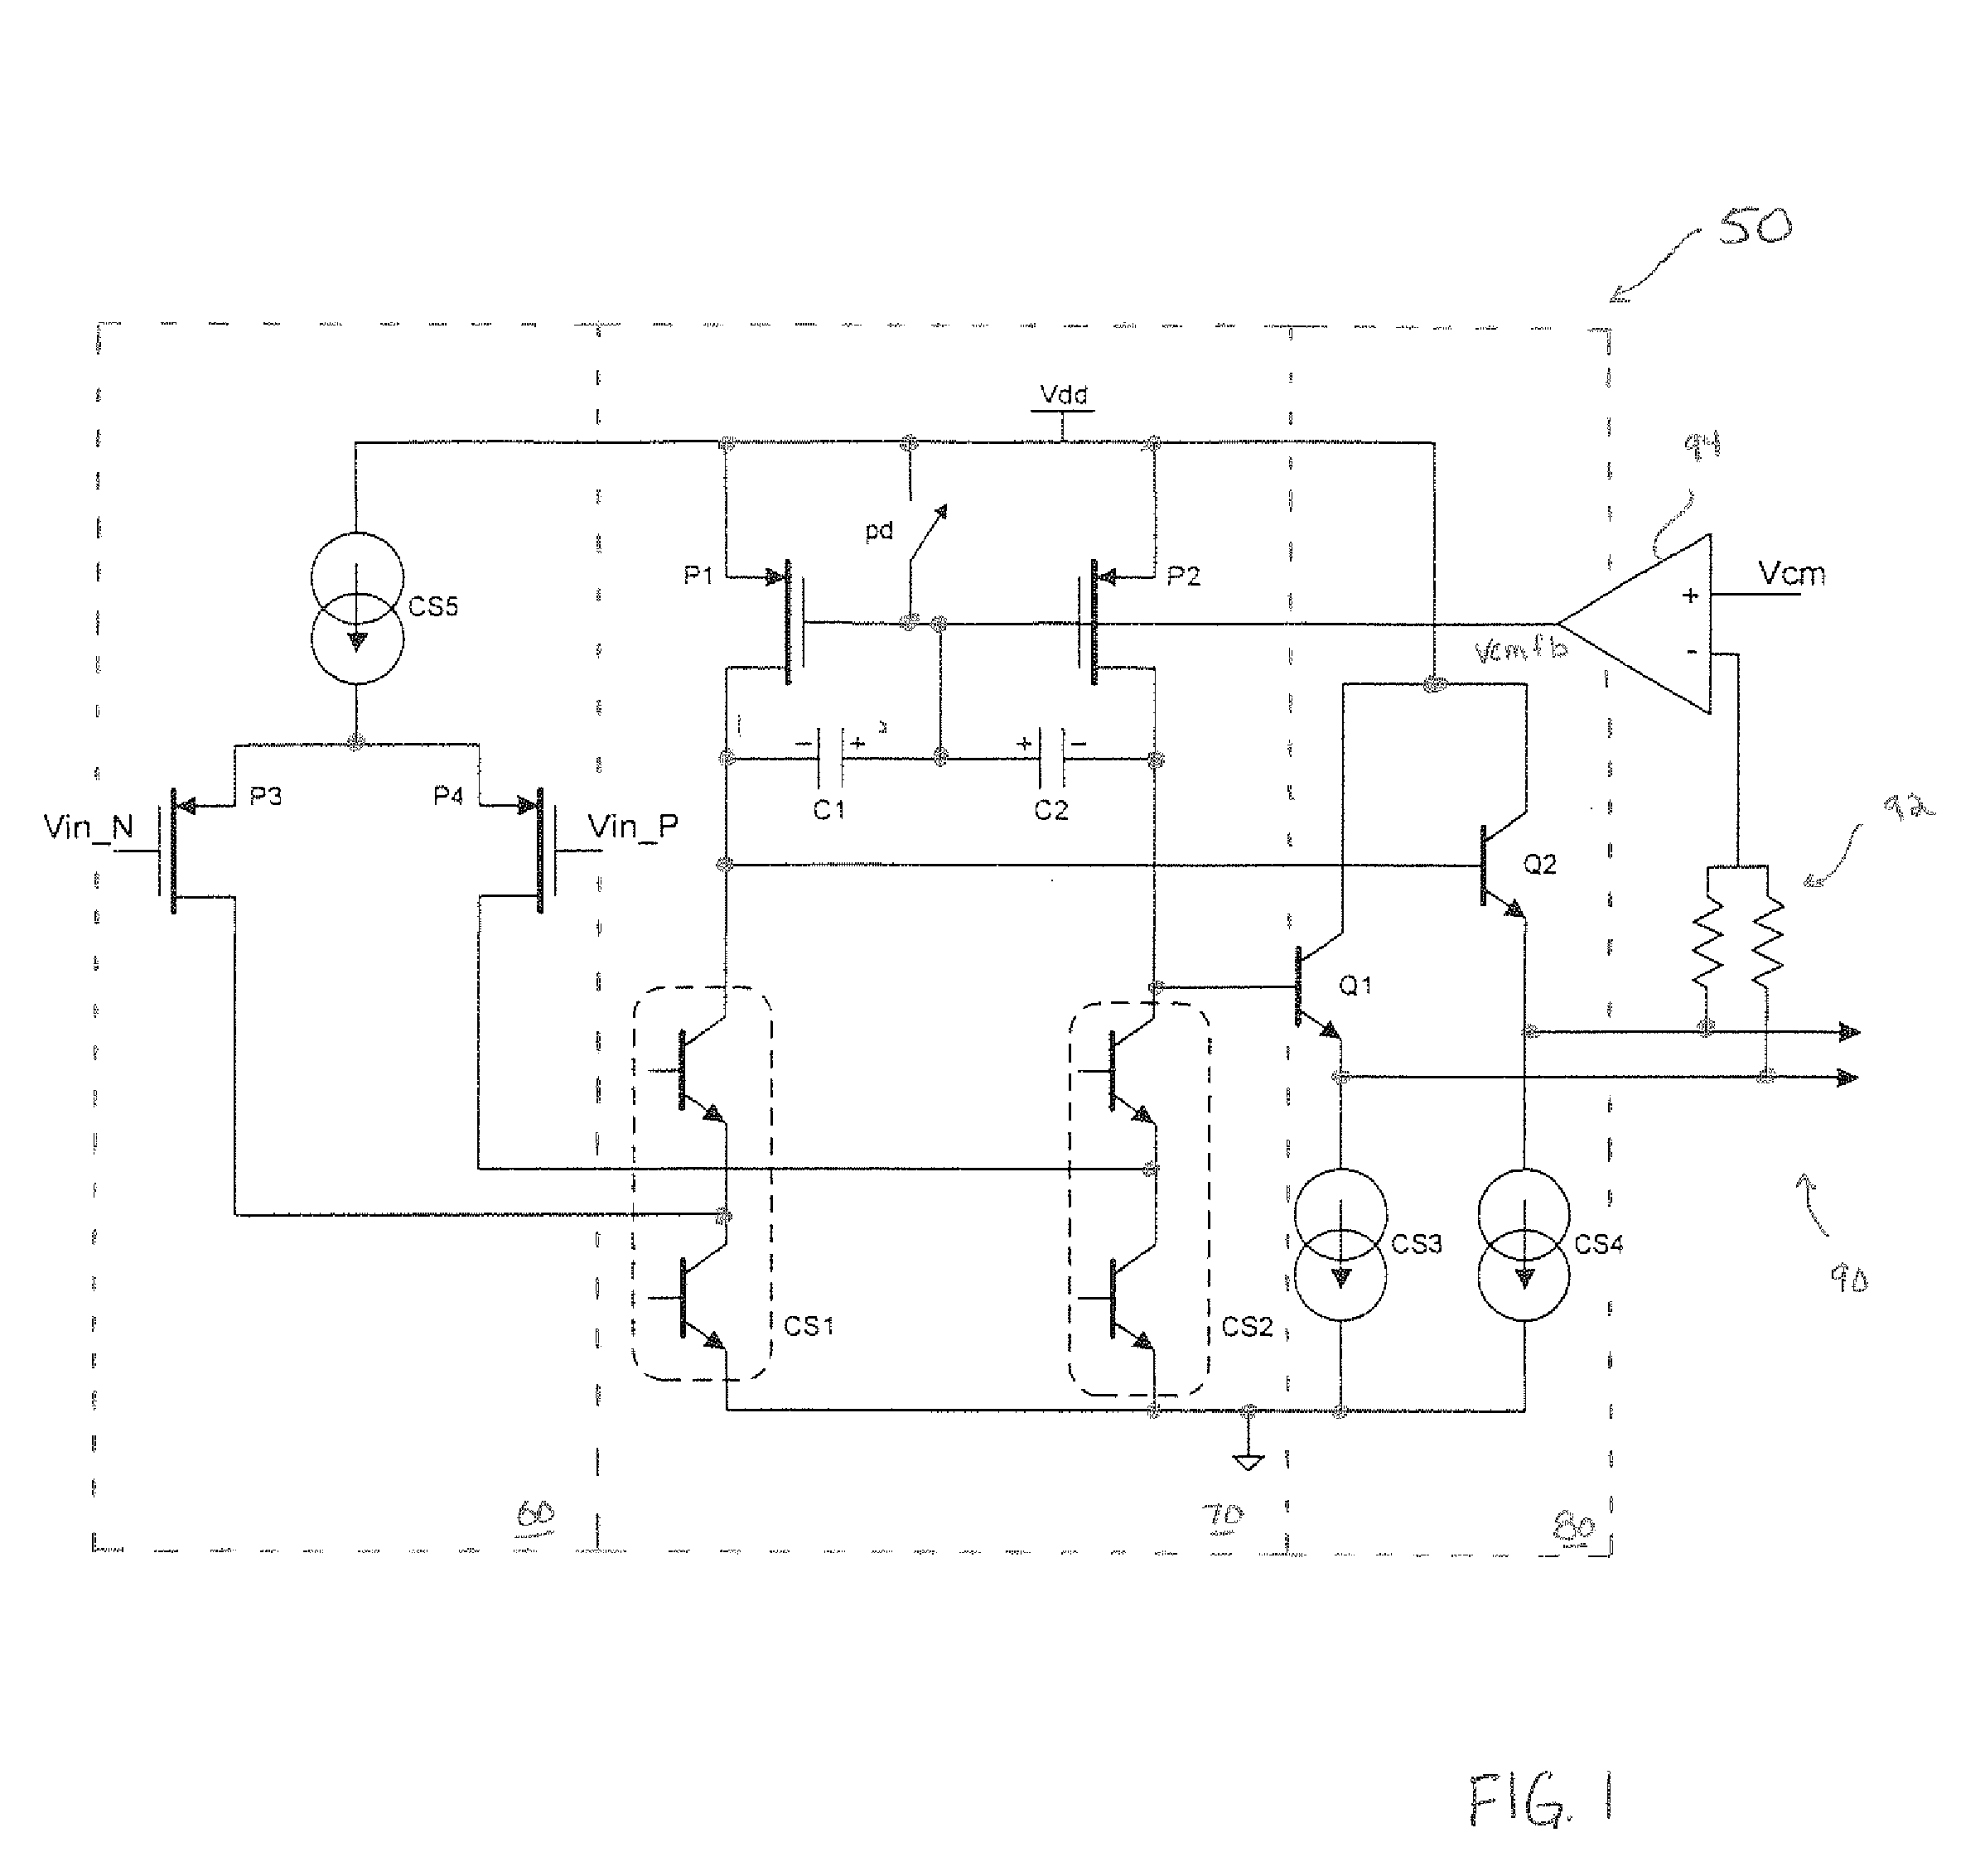 Amplifier circuit with bias stage for controlling a common mode output voltage of the gain stage during device power-up